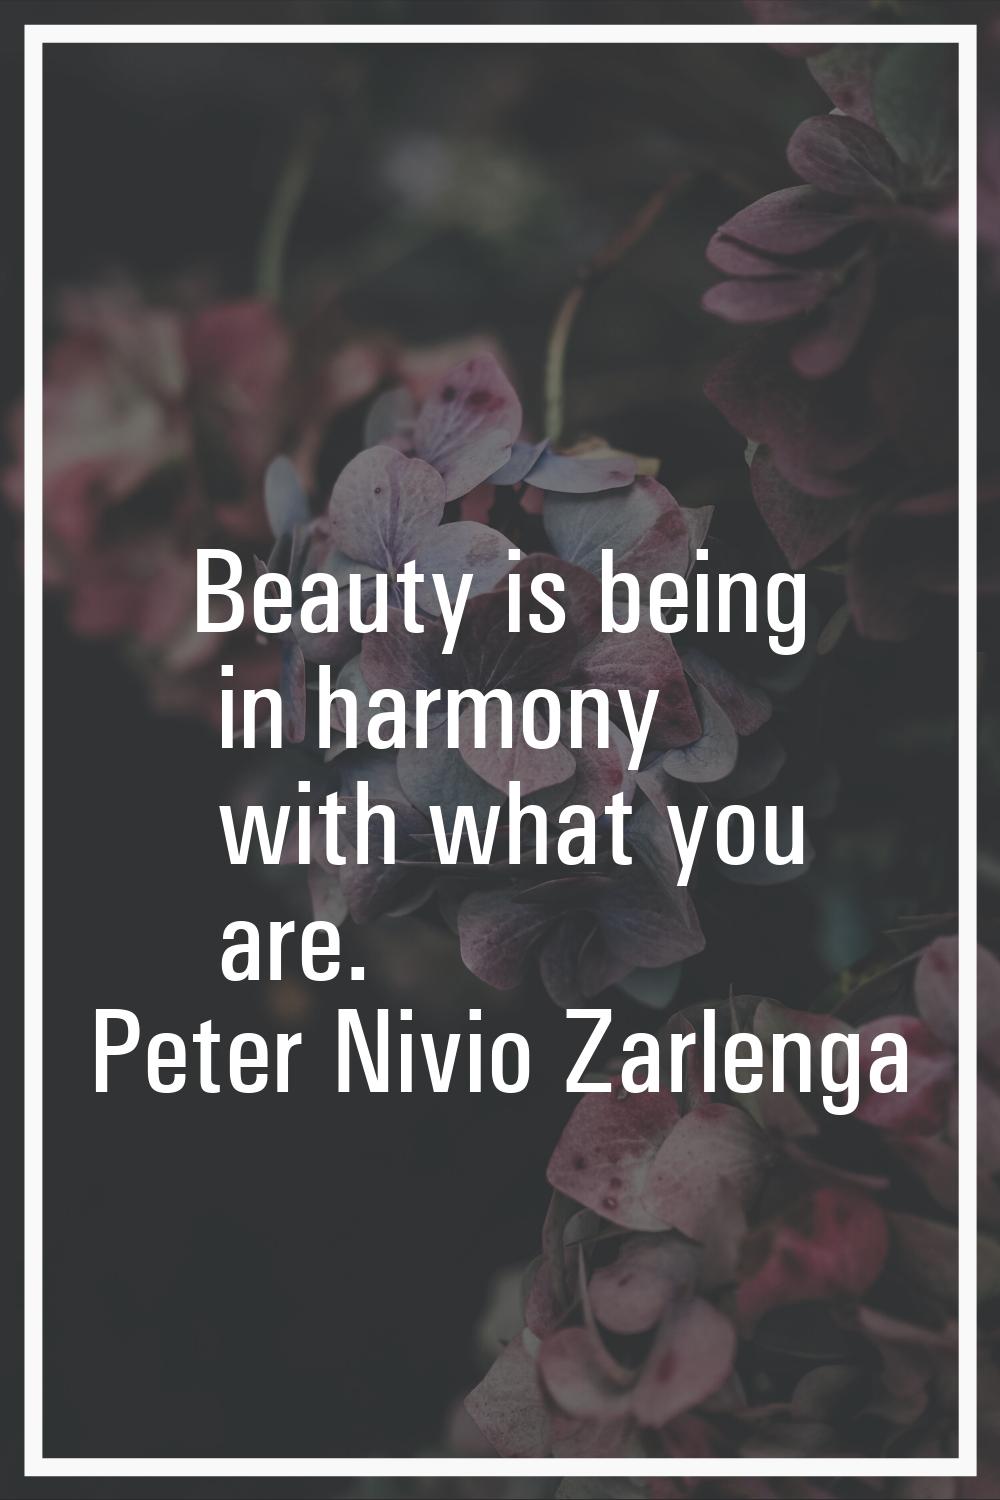 Beauty is being in harmony with what you are.